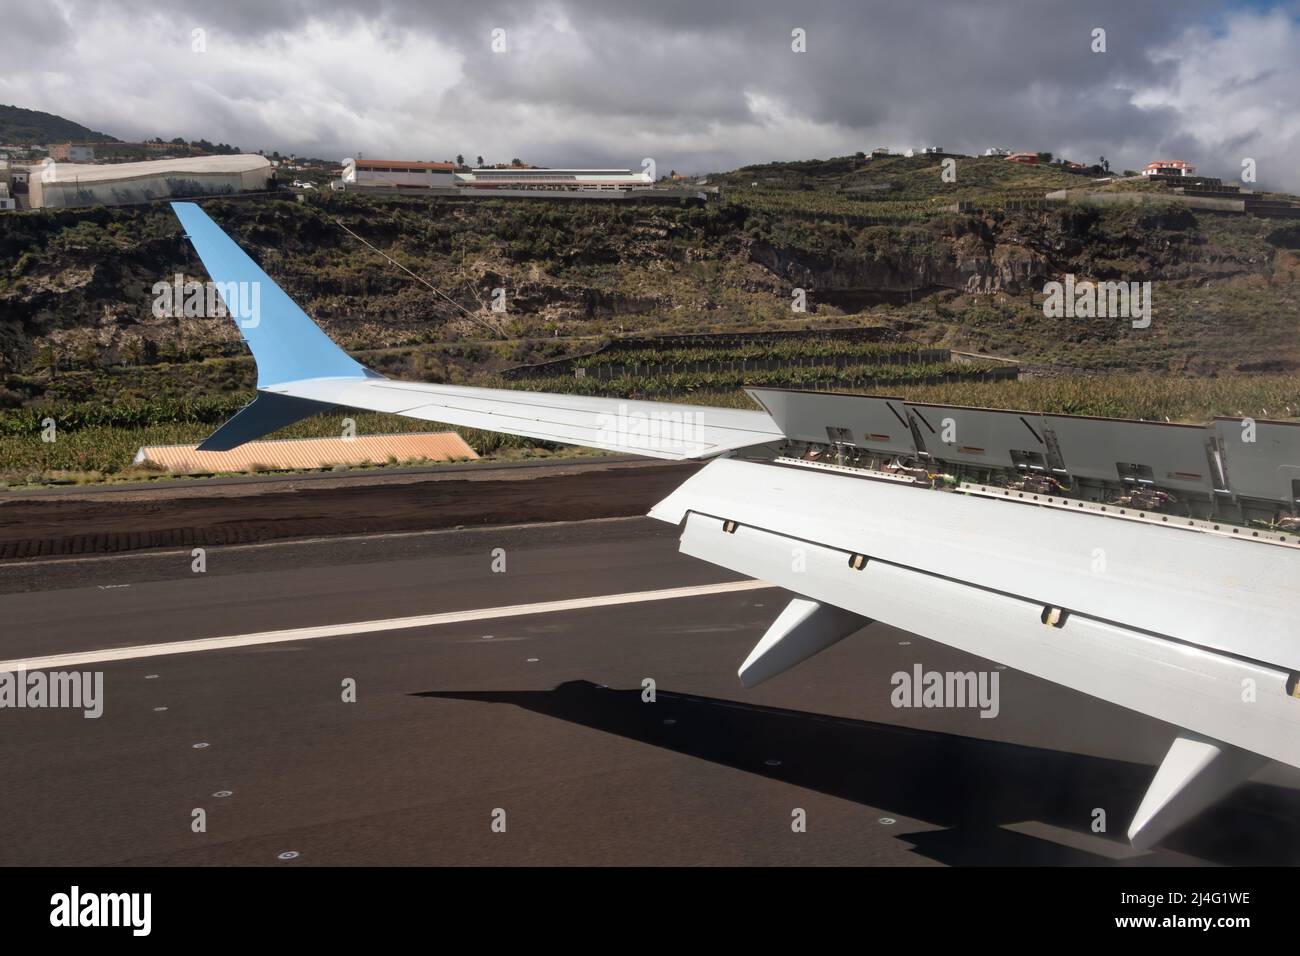 Airplane wing with flaps and spoilers fully extended to slow down the aircraft after landing at La Palma airport Stock Photo